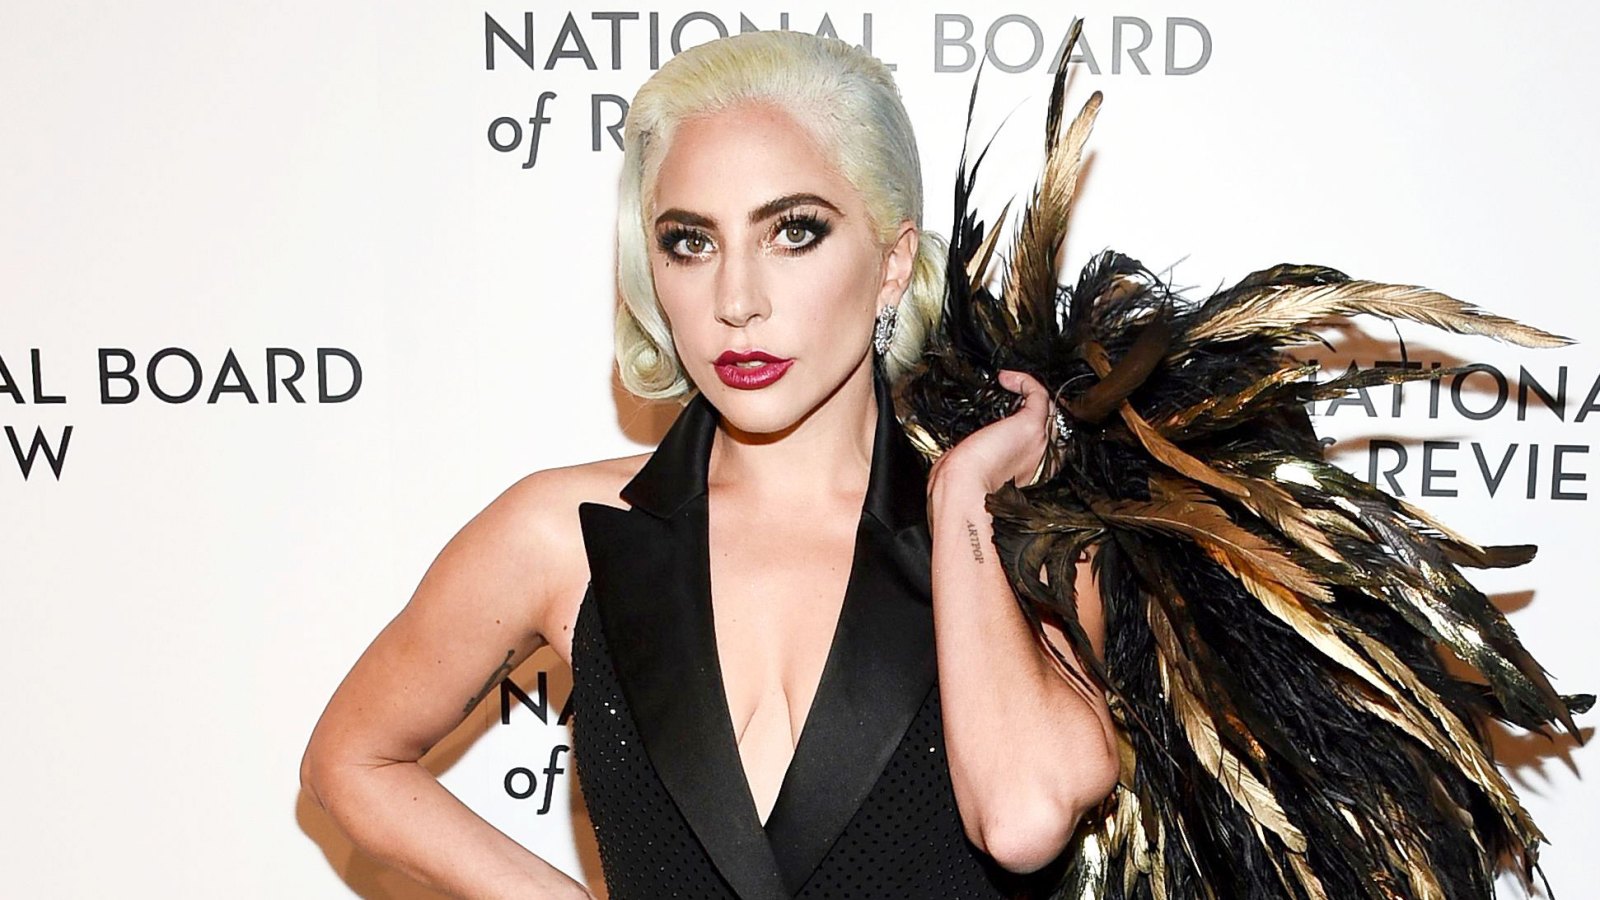 Lady Gaga at National Board of Review awards gala Cancels Las Vegas Concert Due to Sinus Infection and Bronchitis